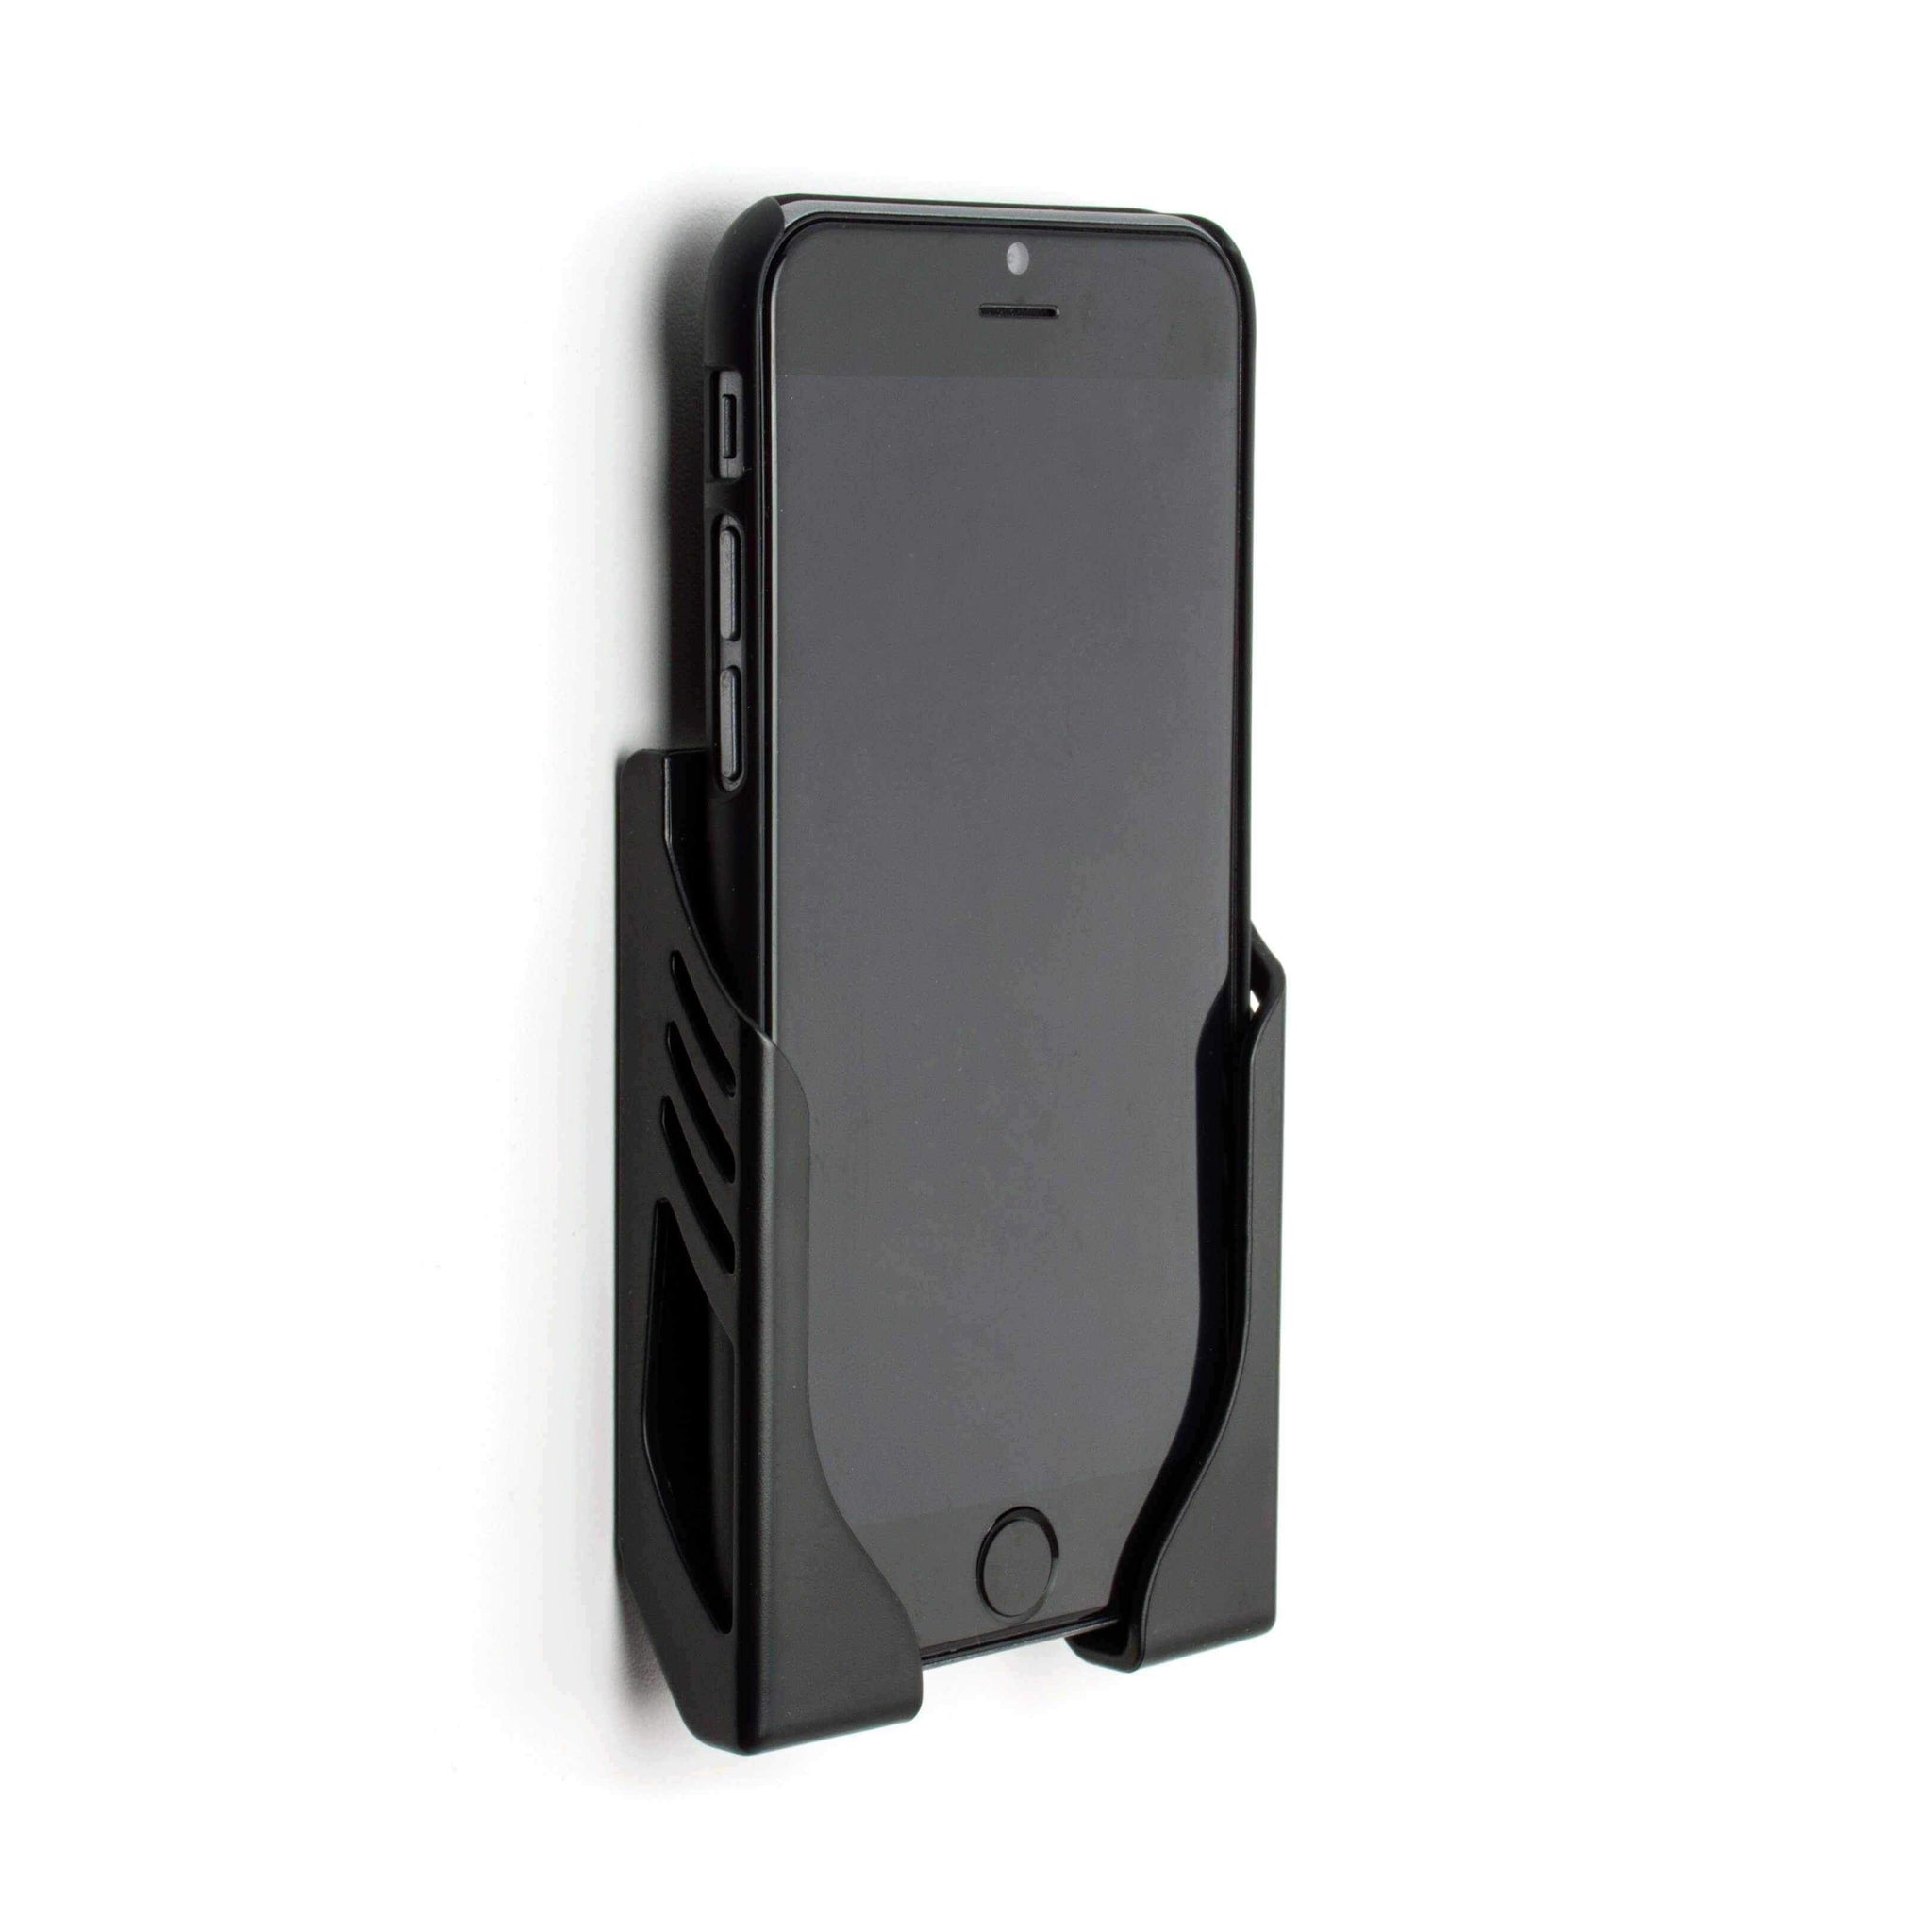 Damage-Free Adhesive Wall Mount for Apple iPhones